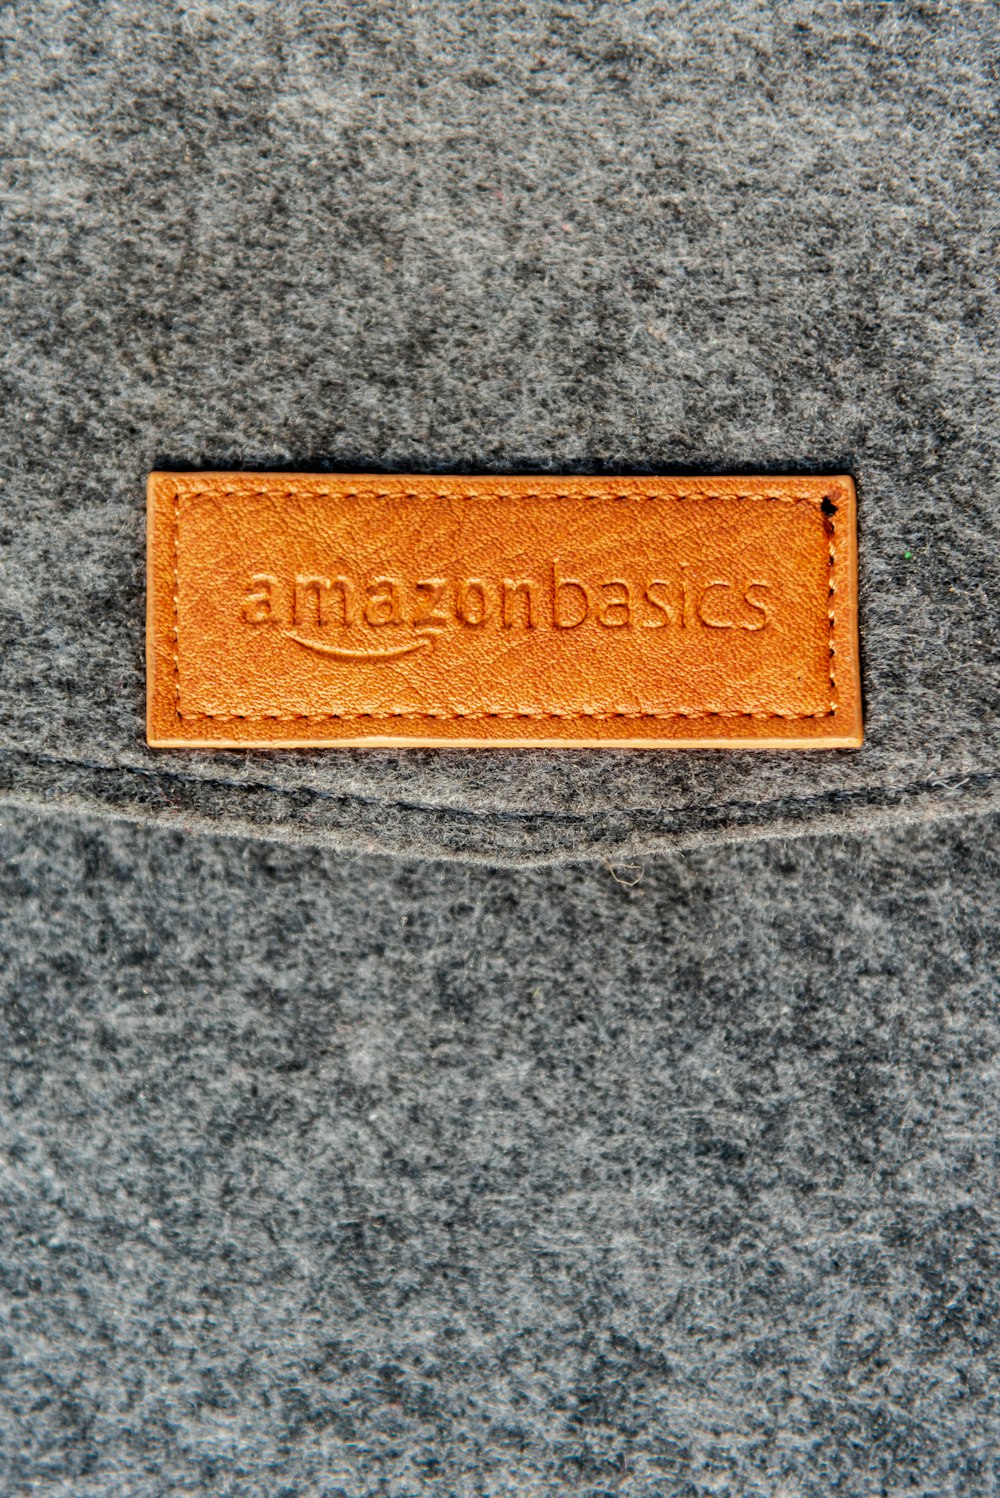 a close up of a leather label on a gray surface